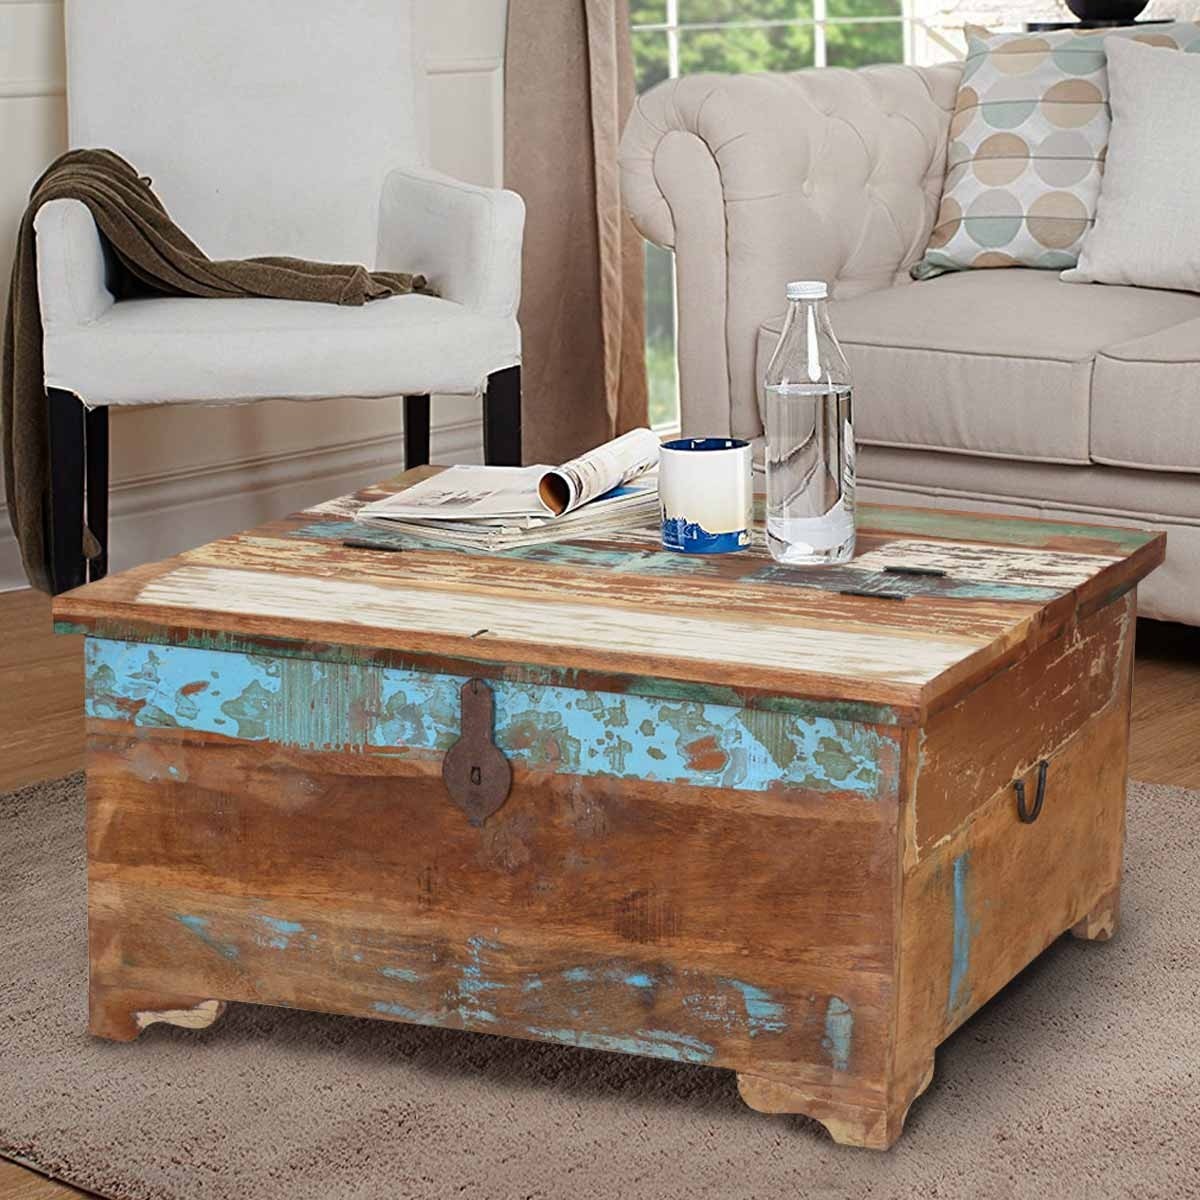 Appalachia handcrafted reclaimed wood coffee table trunk